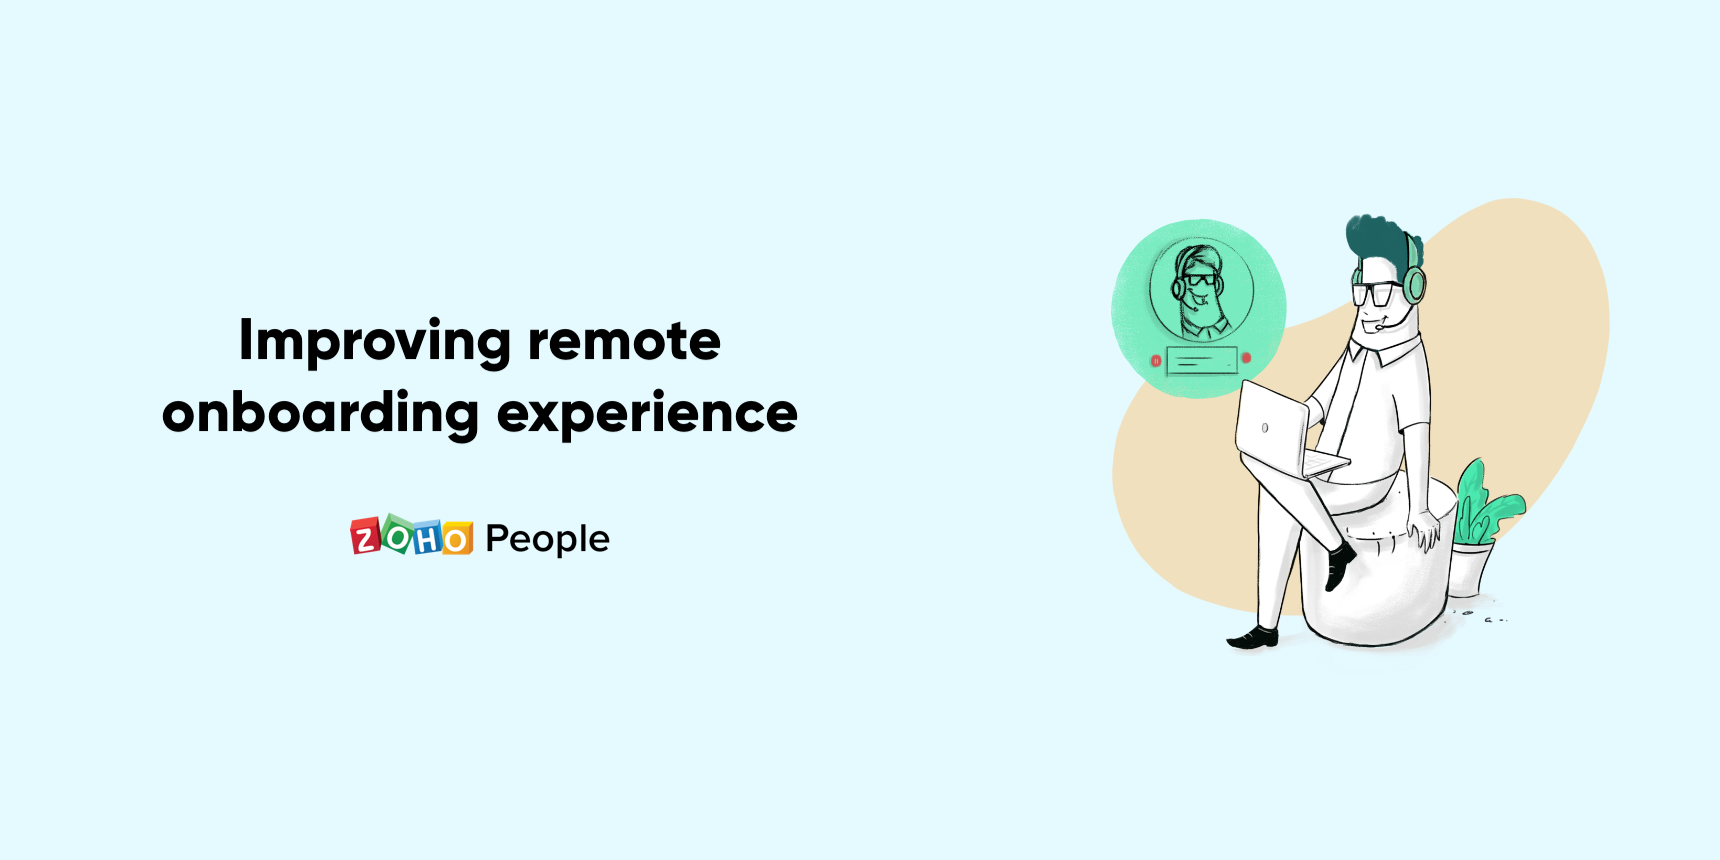 Tips to improve the onboarding experience of remote employees